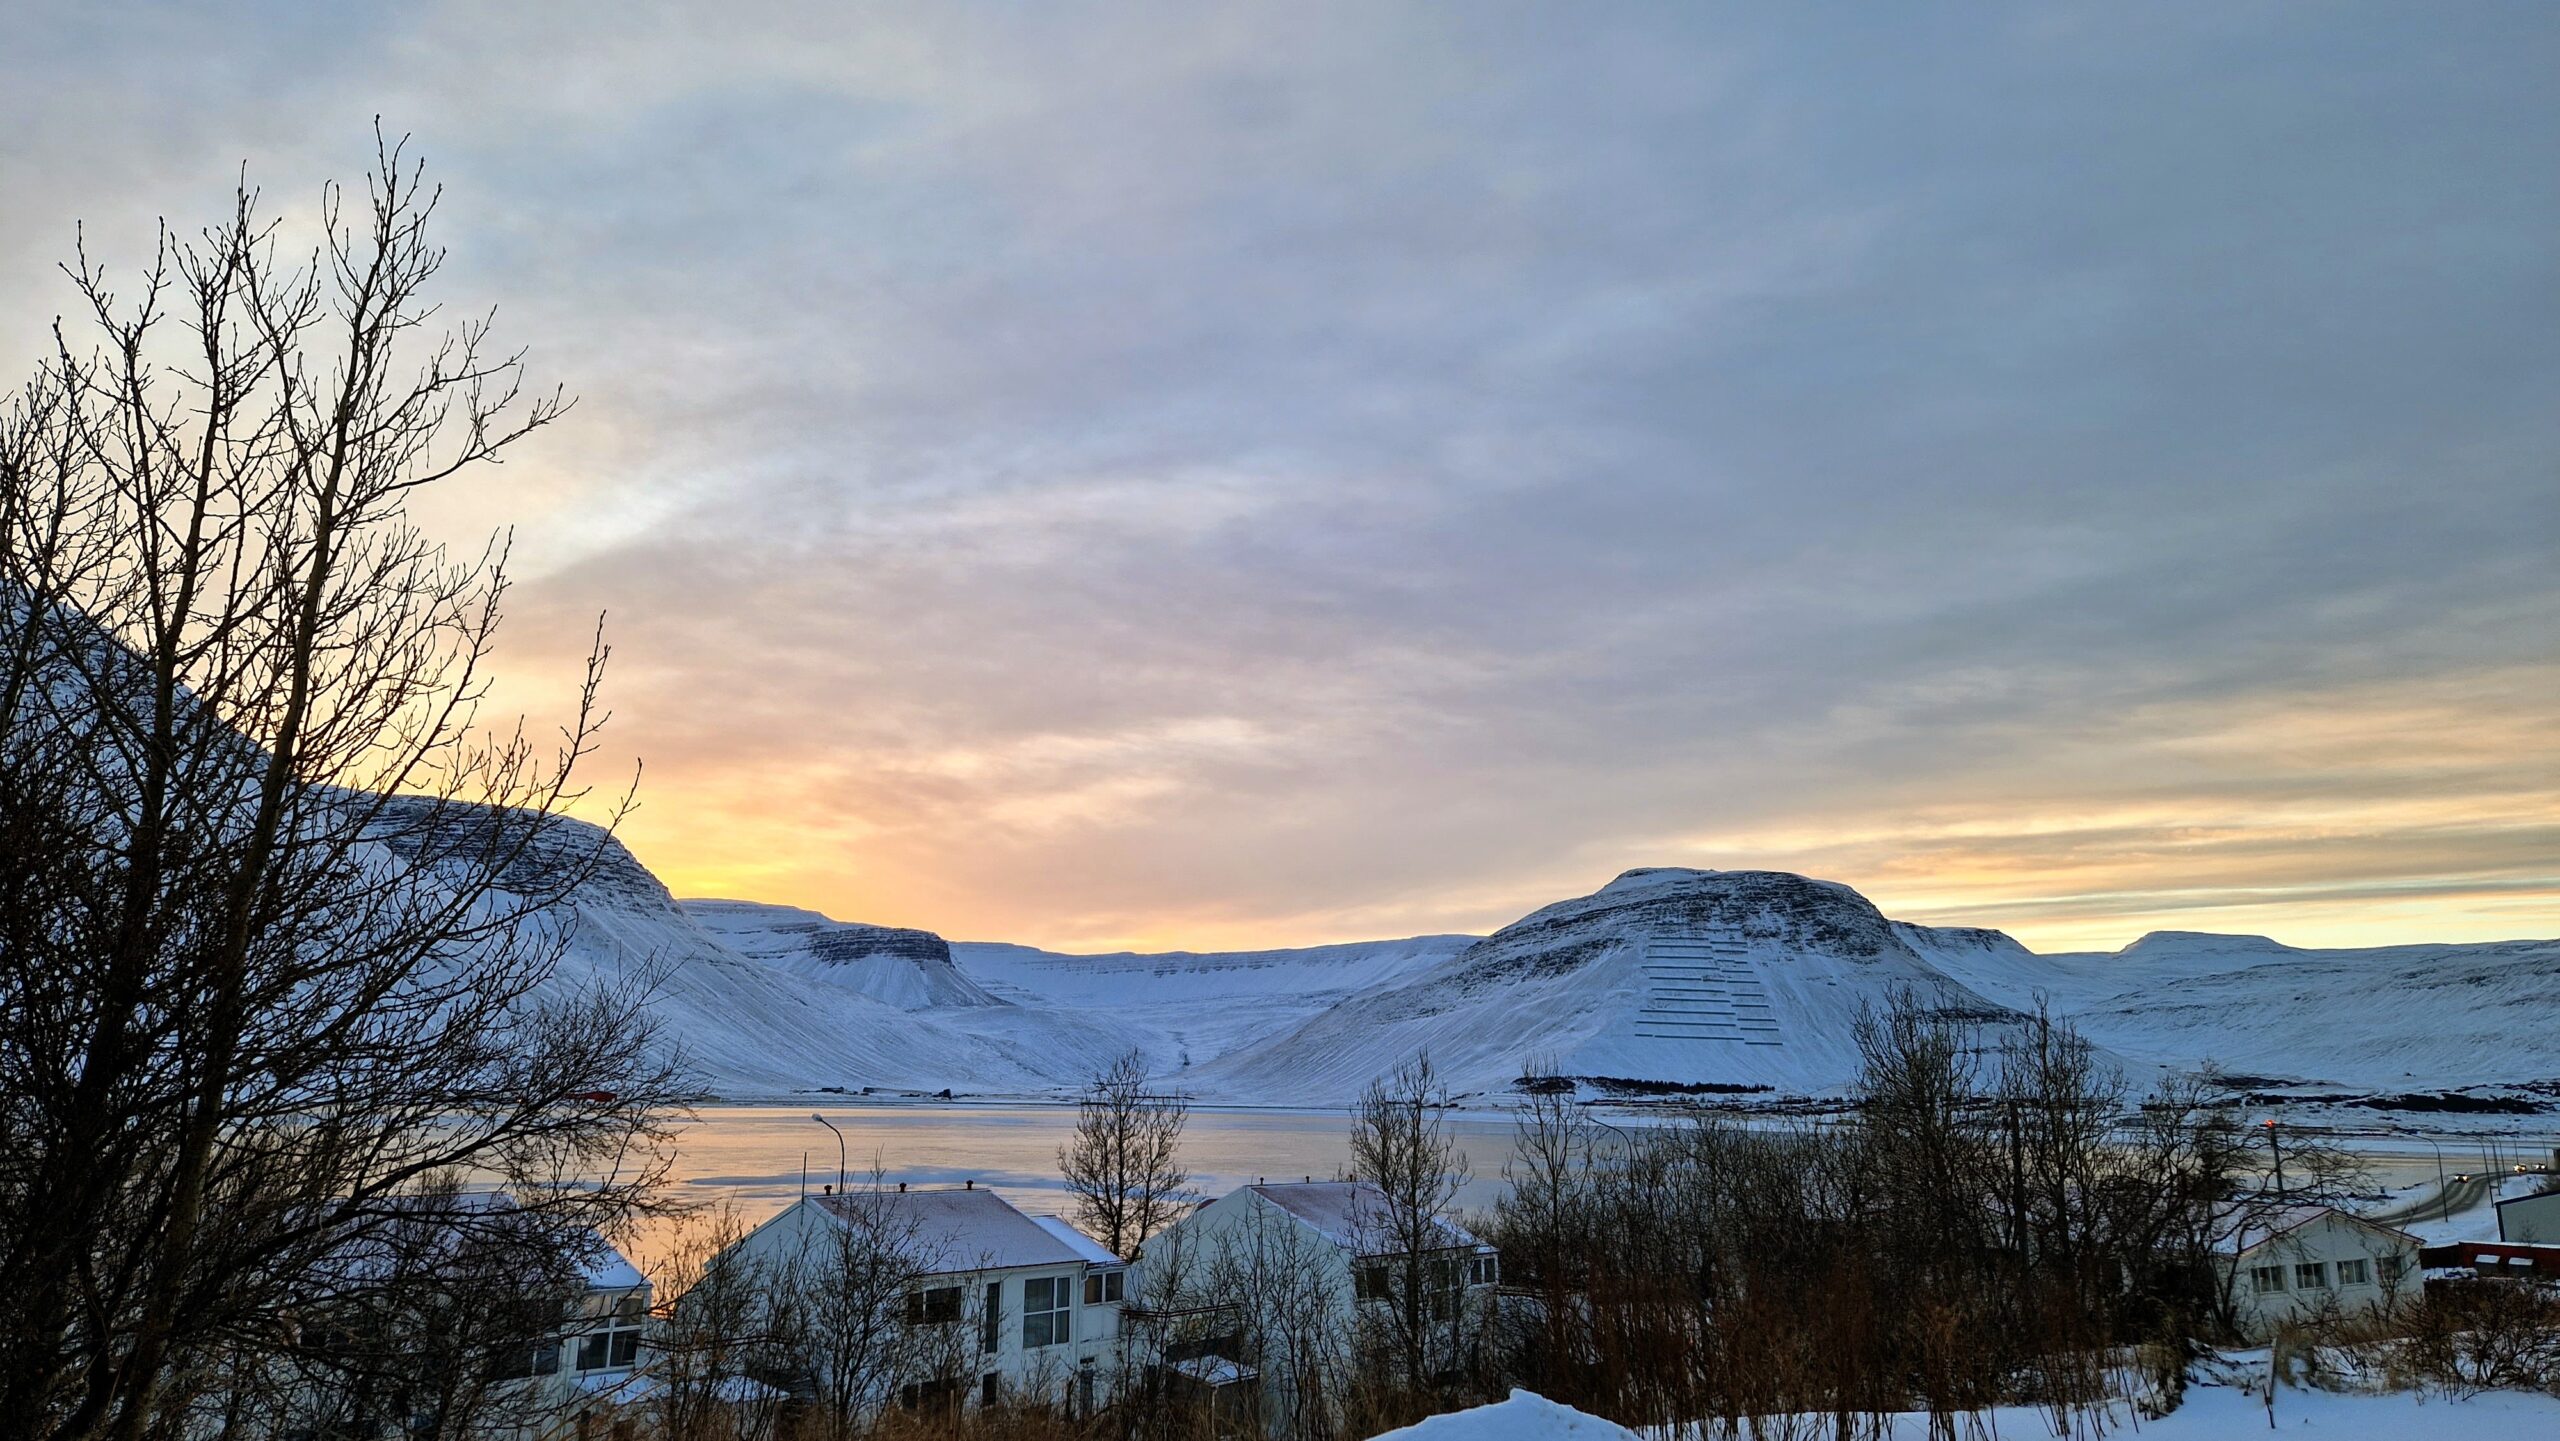 Isafjordur Town in the days between Christmas and New Year's